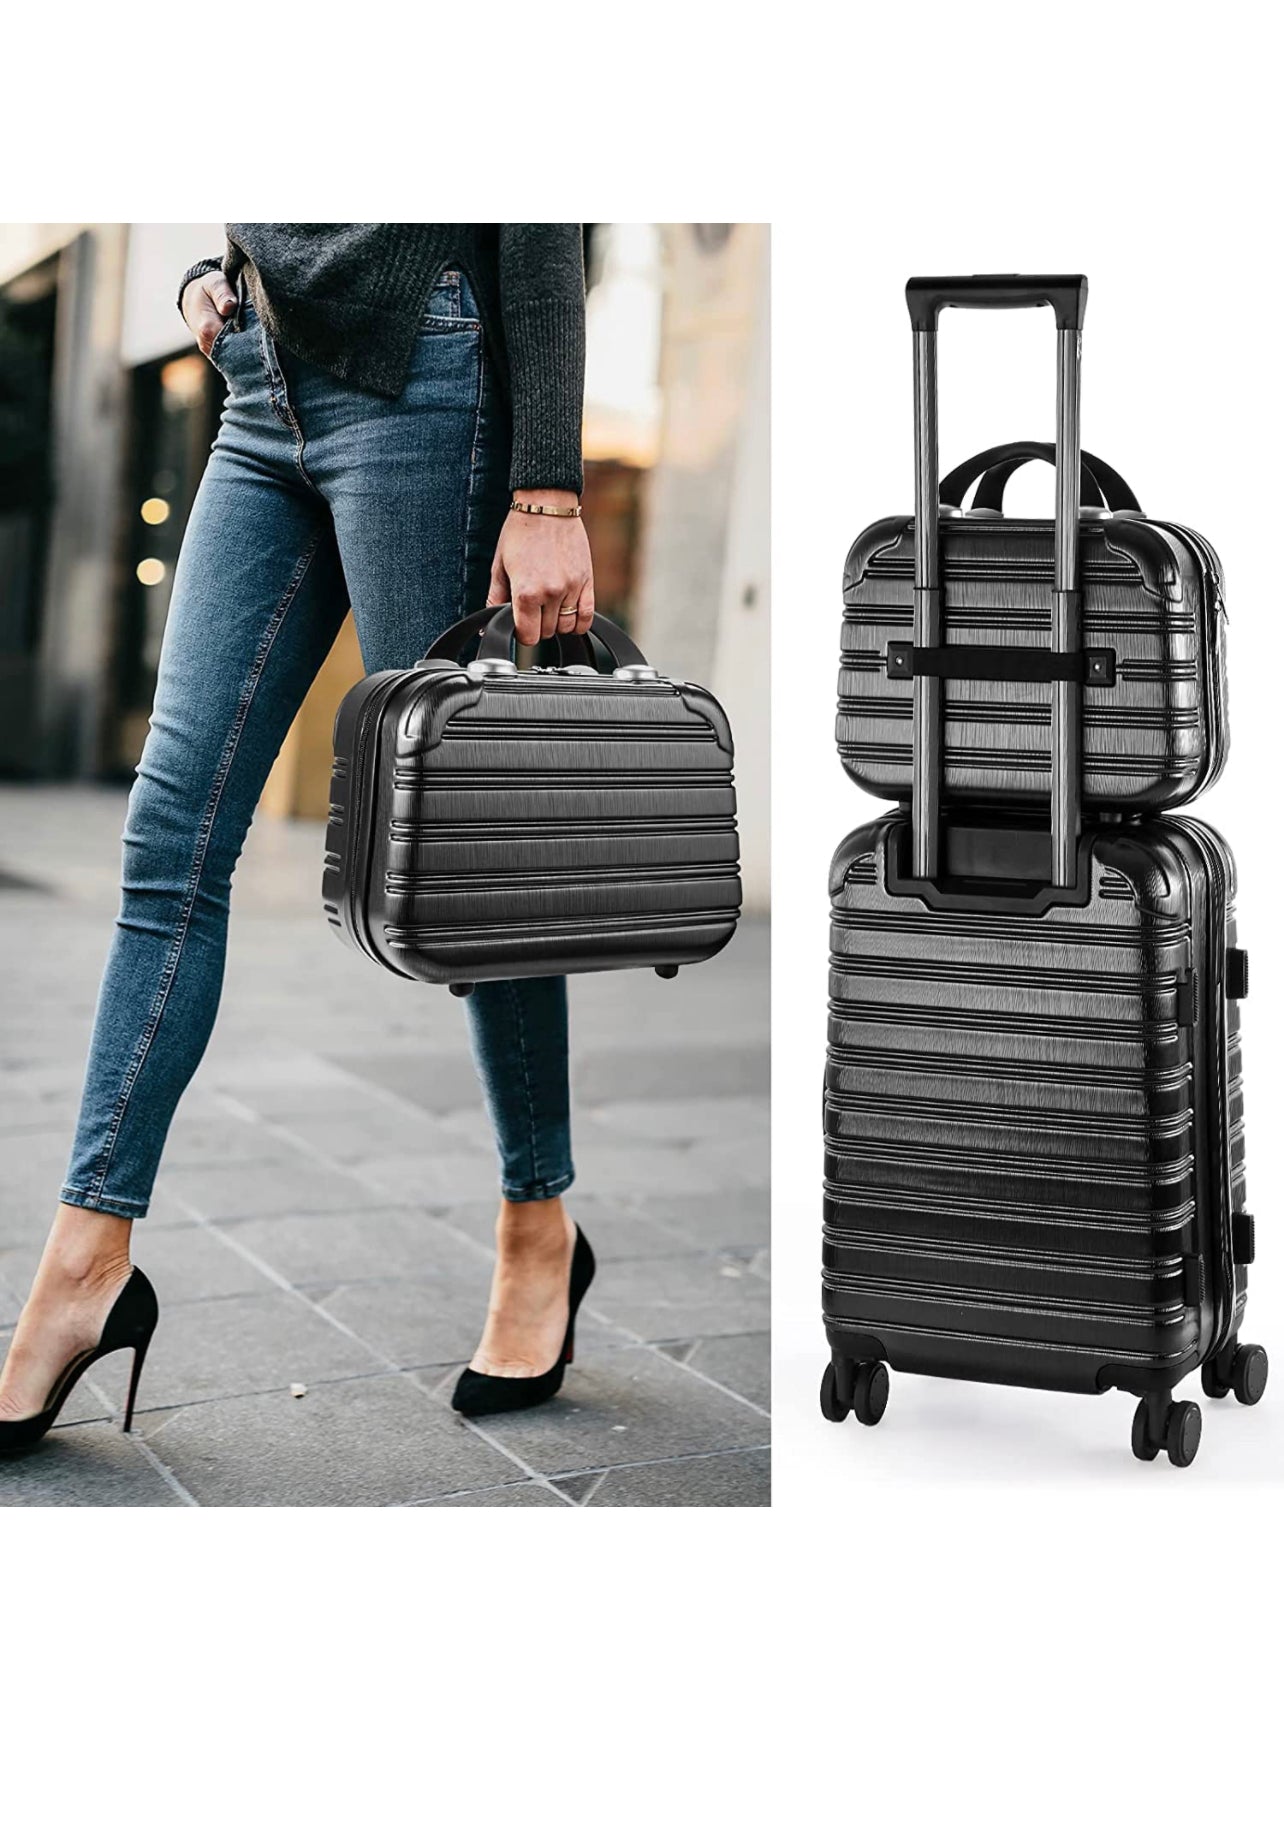 Carry on Luggage 20" Suitcase 14" Mini Cosmetic Cases Luggage Sets Hardside PC ABS Lightweight USB Suitcase with Wheels TSA 2 Piece Set 14/20 - MyTravelShop.ca